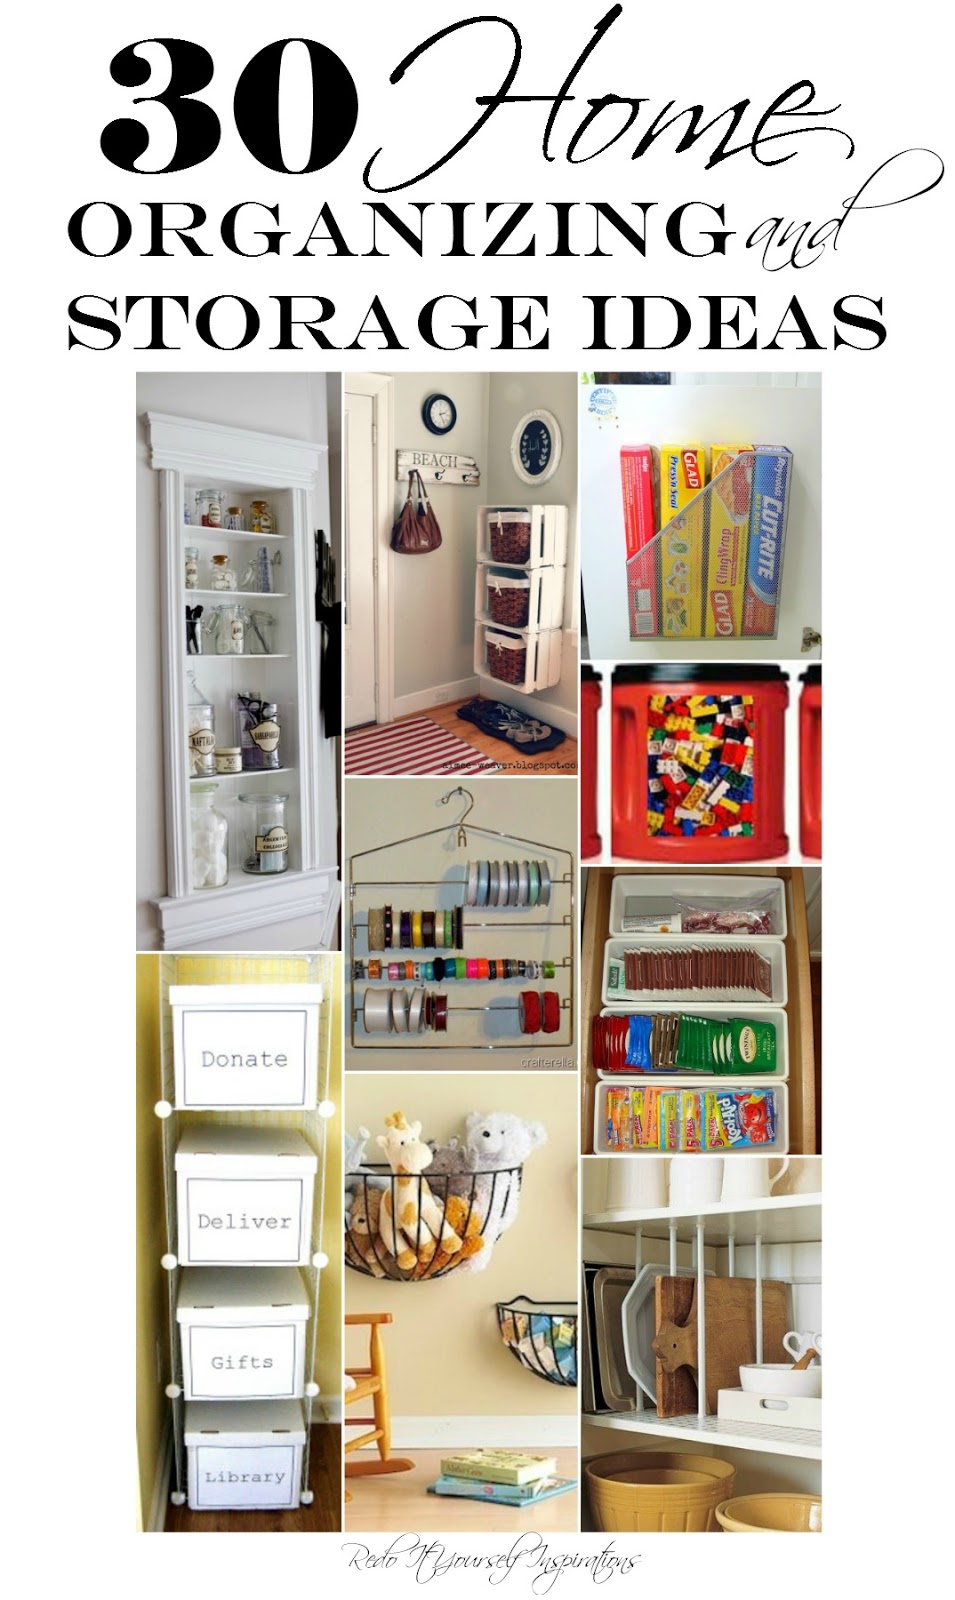 Redo It Yourself Inspirations : Home Organizing and Storage Ideas